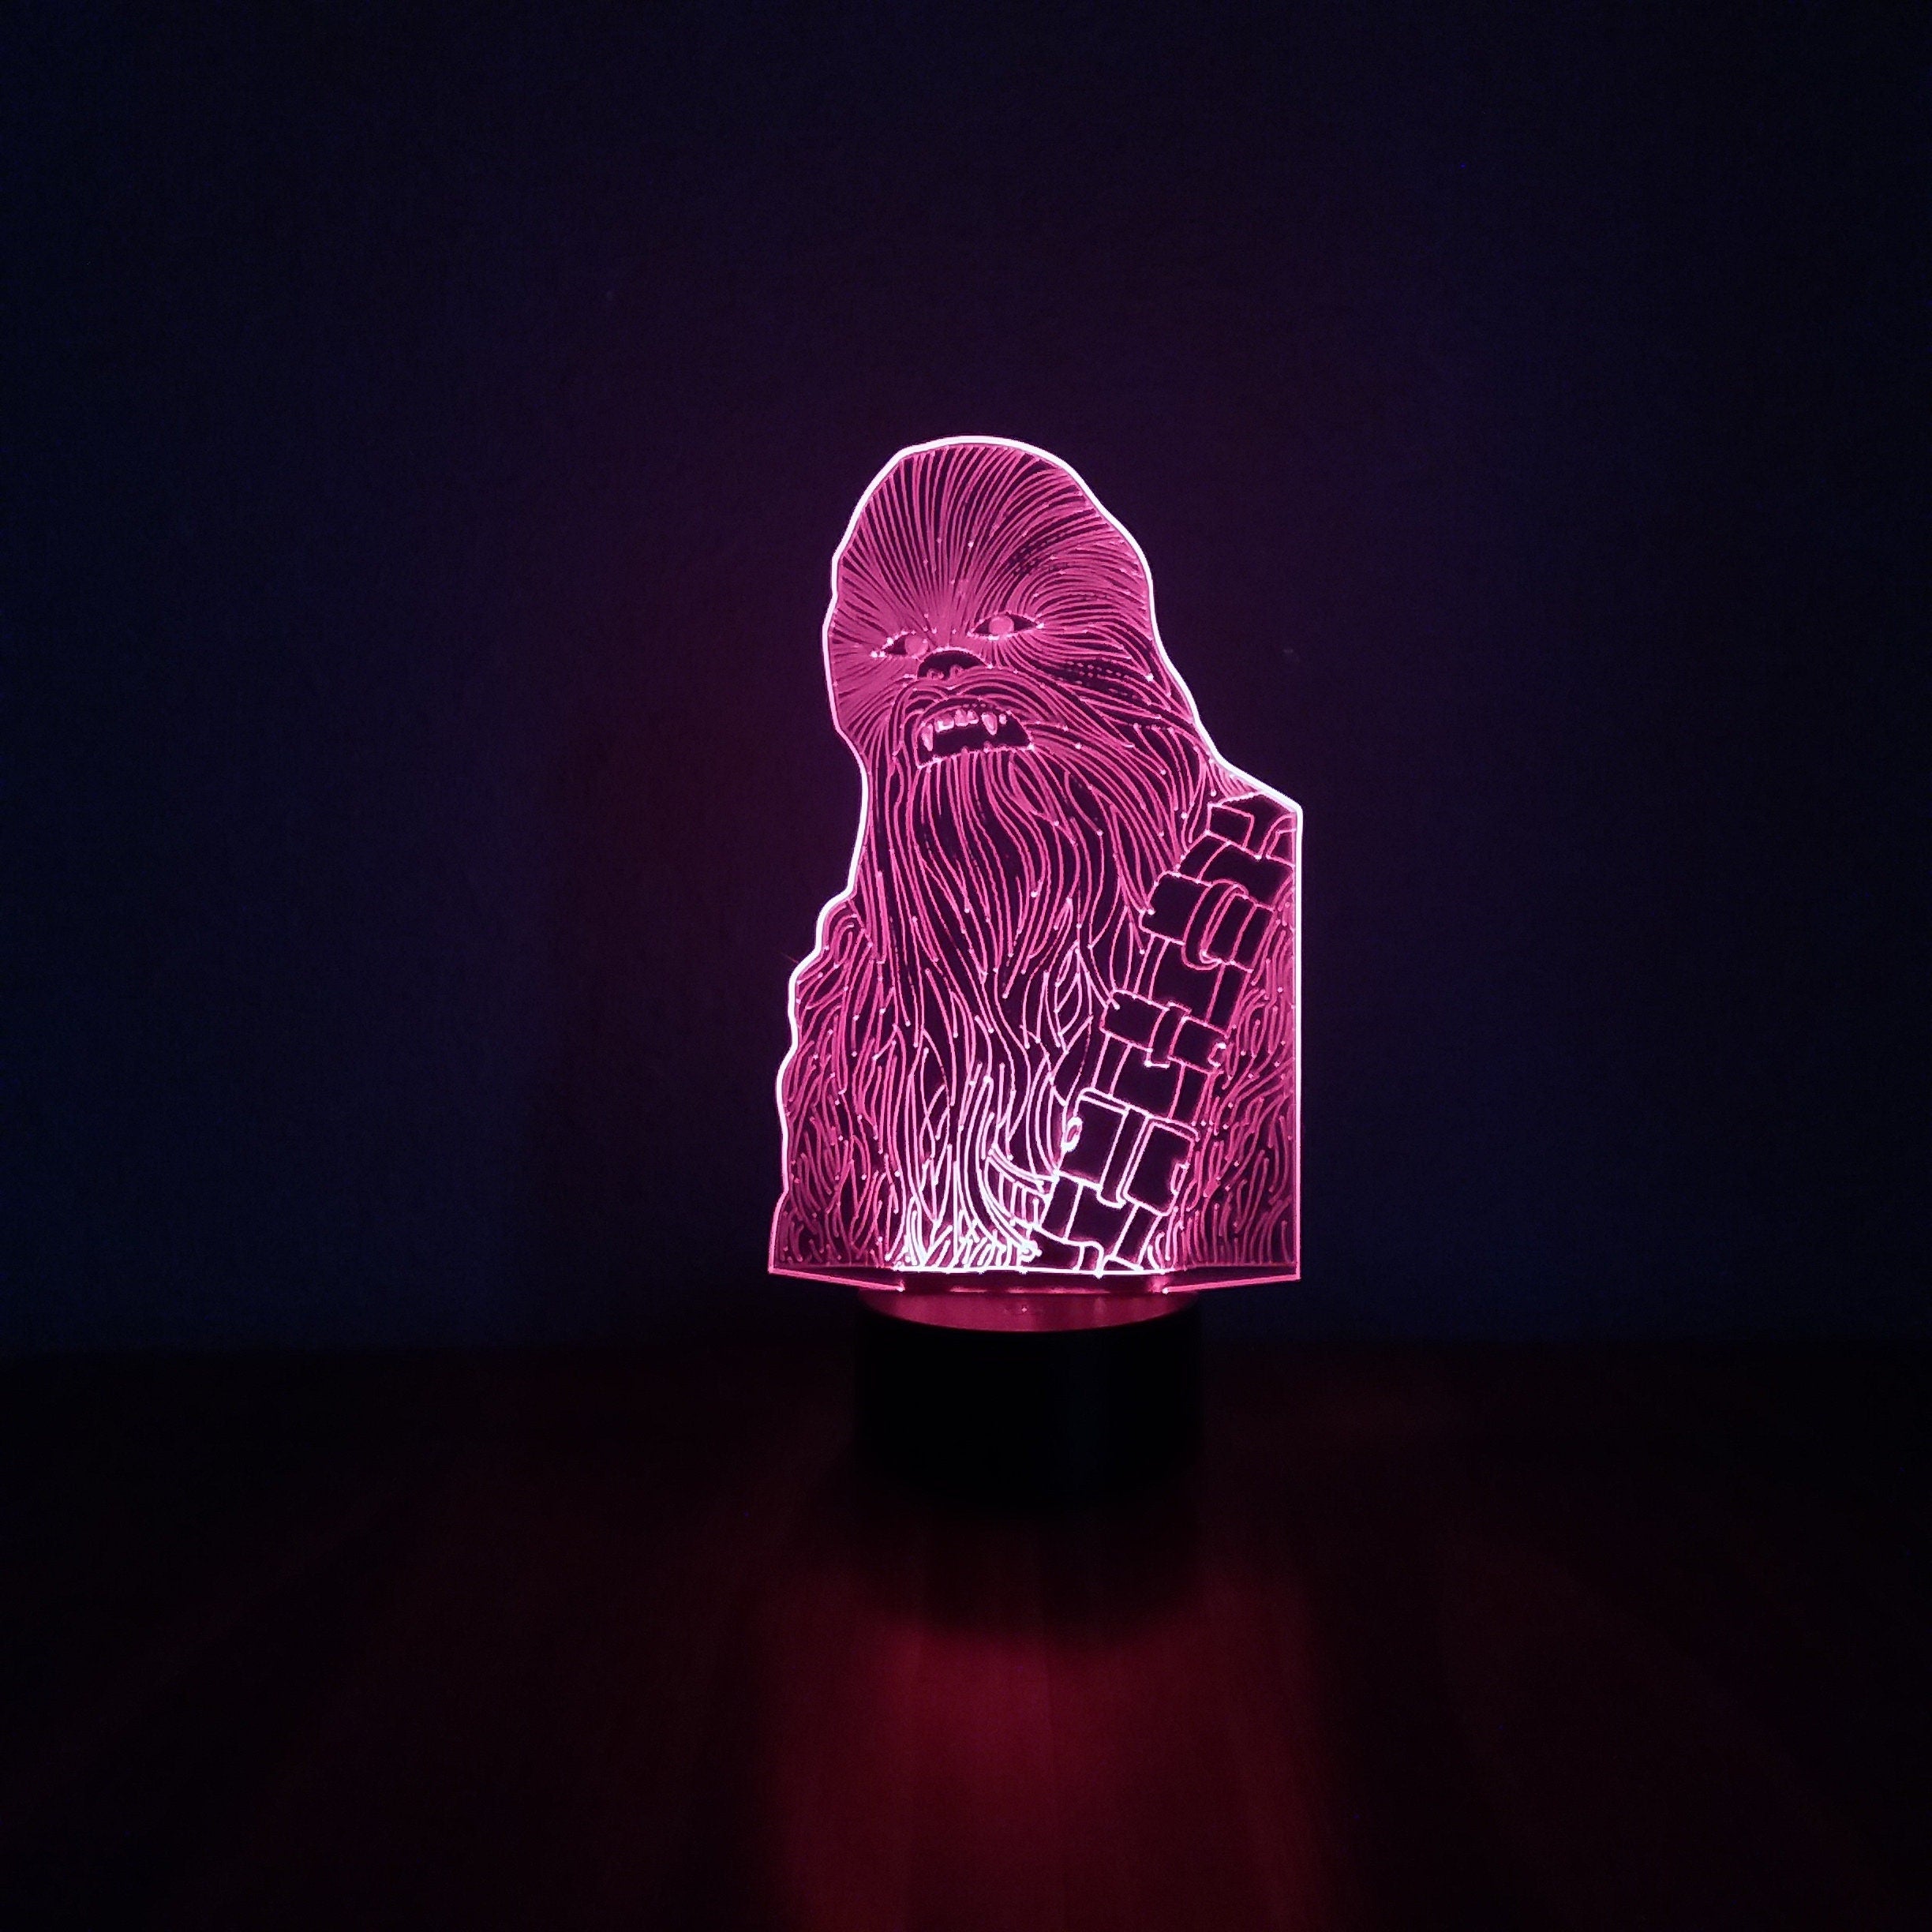 Awesome "Star Wars Chewbacca" 3D LED Lamp (1246) - FREE Shipping!